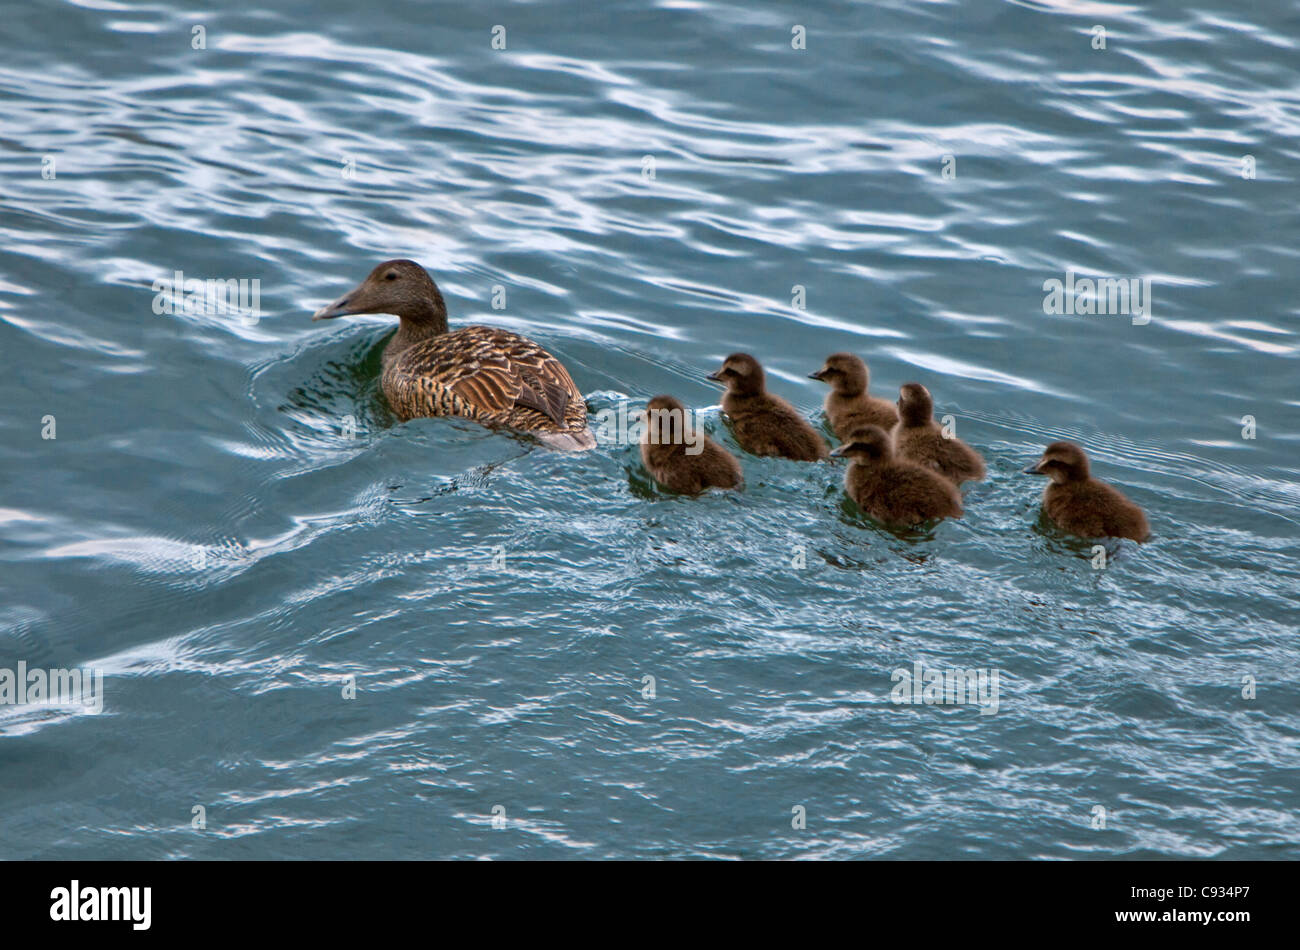 A common eider and her chicks.  Eiders are widespread along the coasts of Iceland. Stock Photo